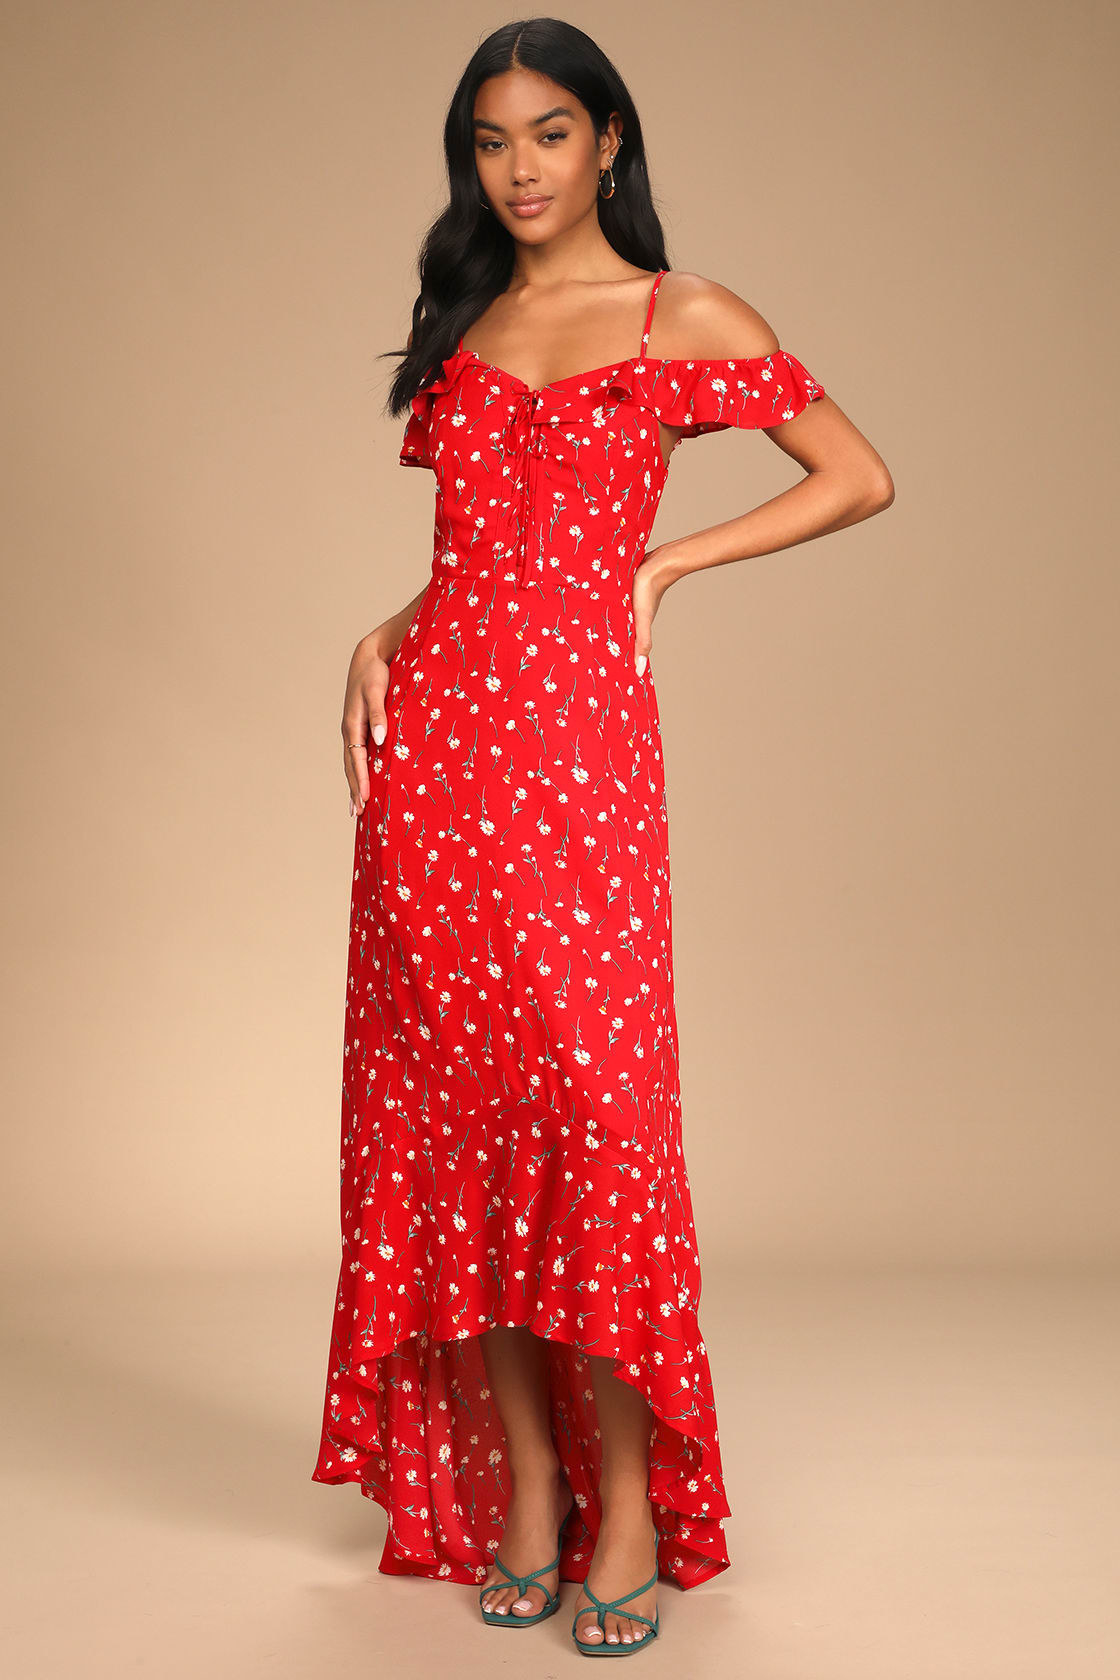 model wearing the dress in red floral